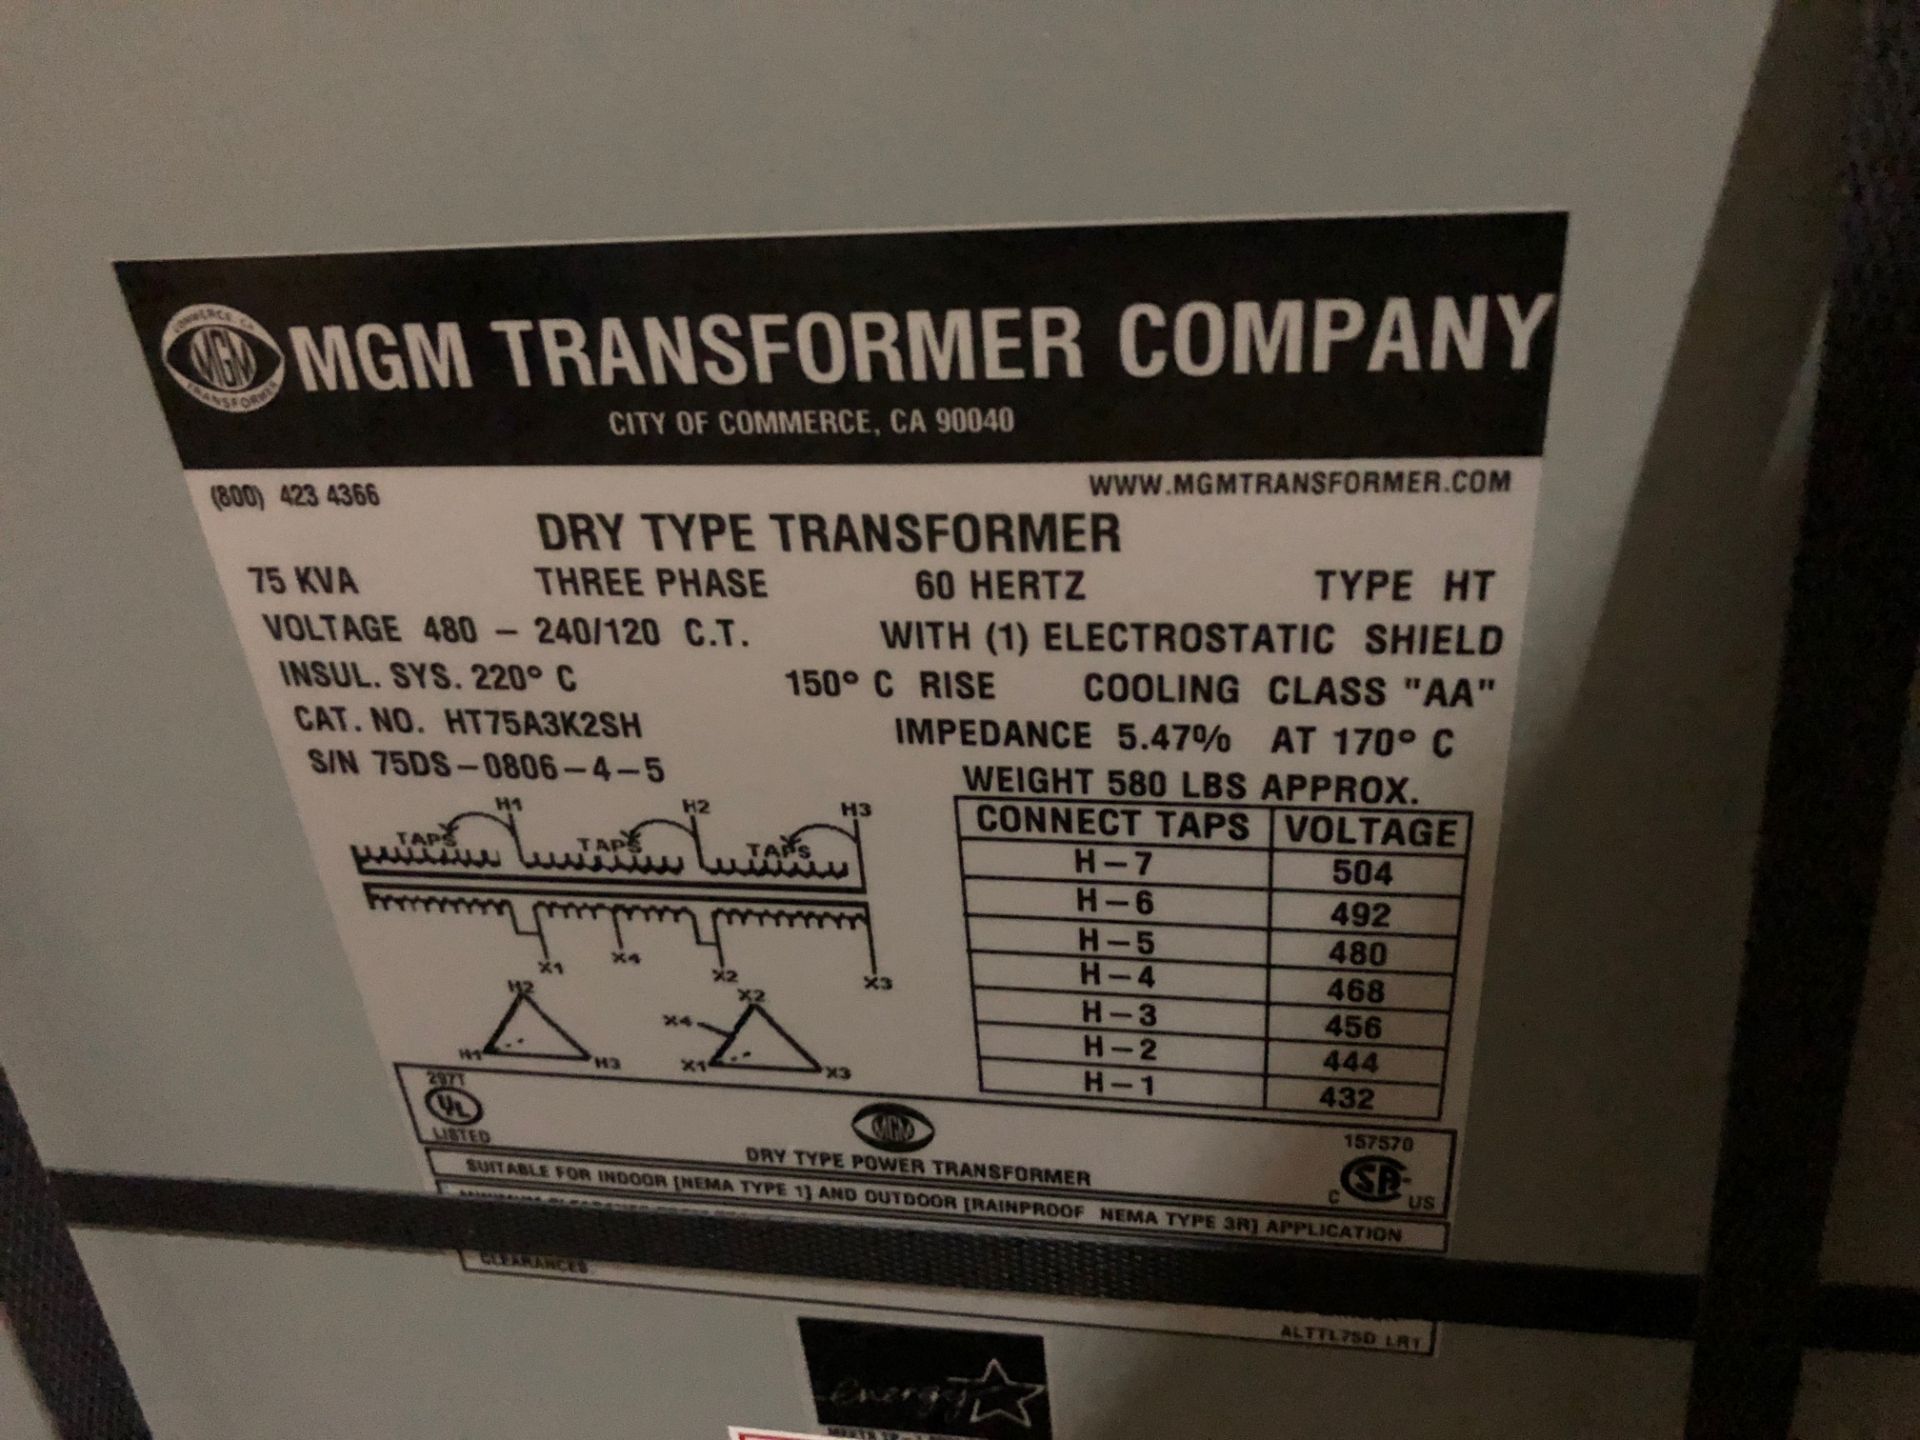 MGM Transformer Rigging Fee for the item: $30